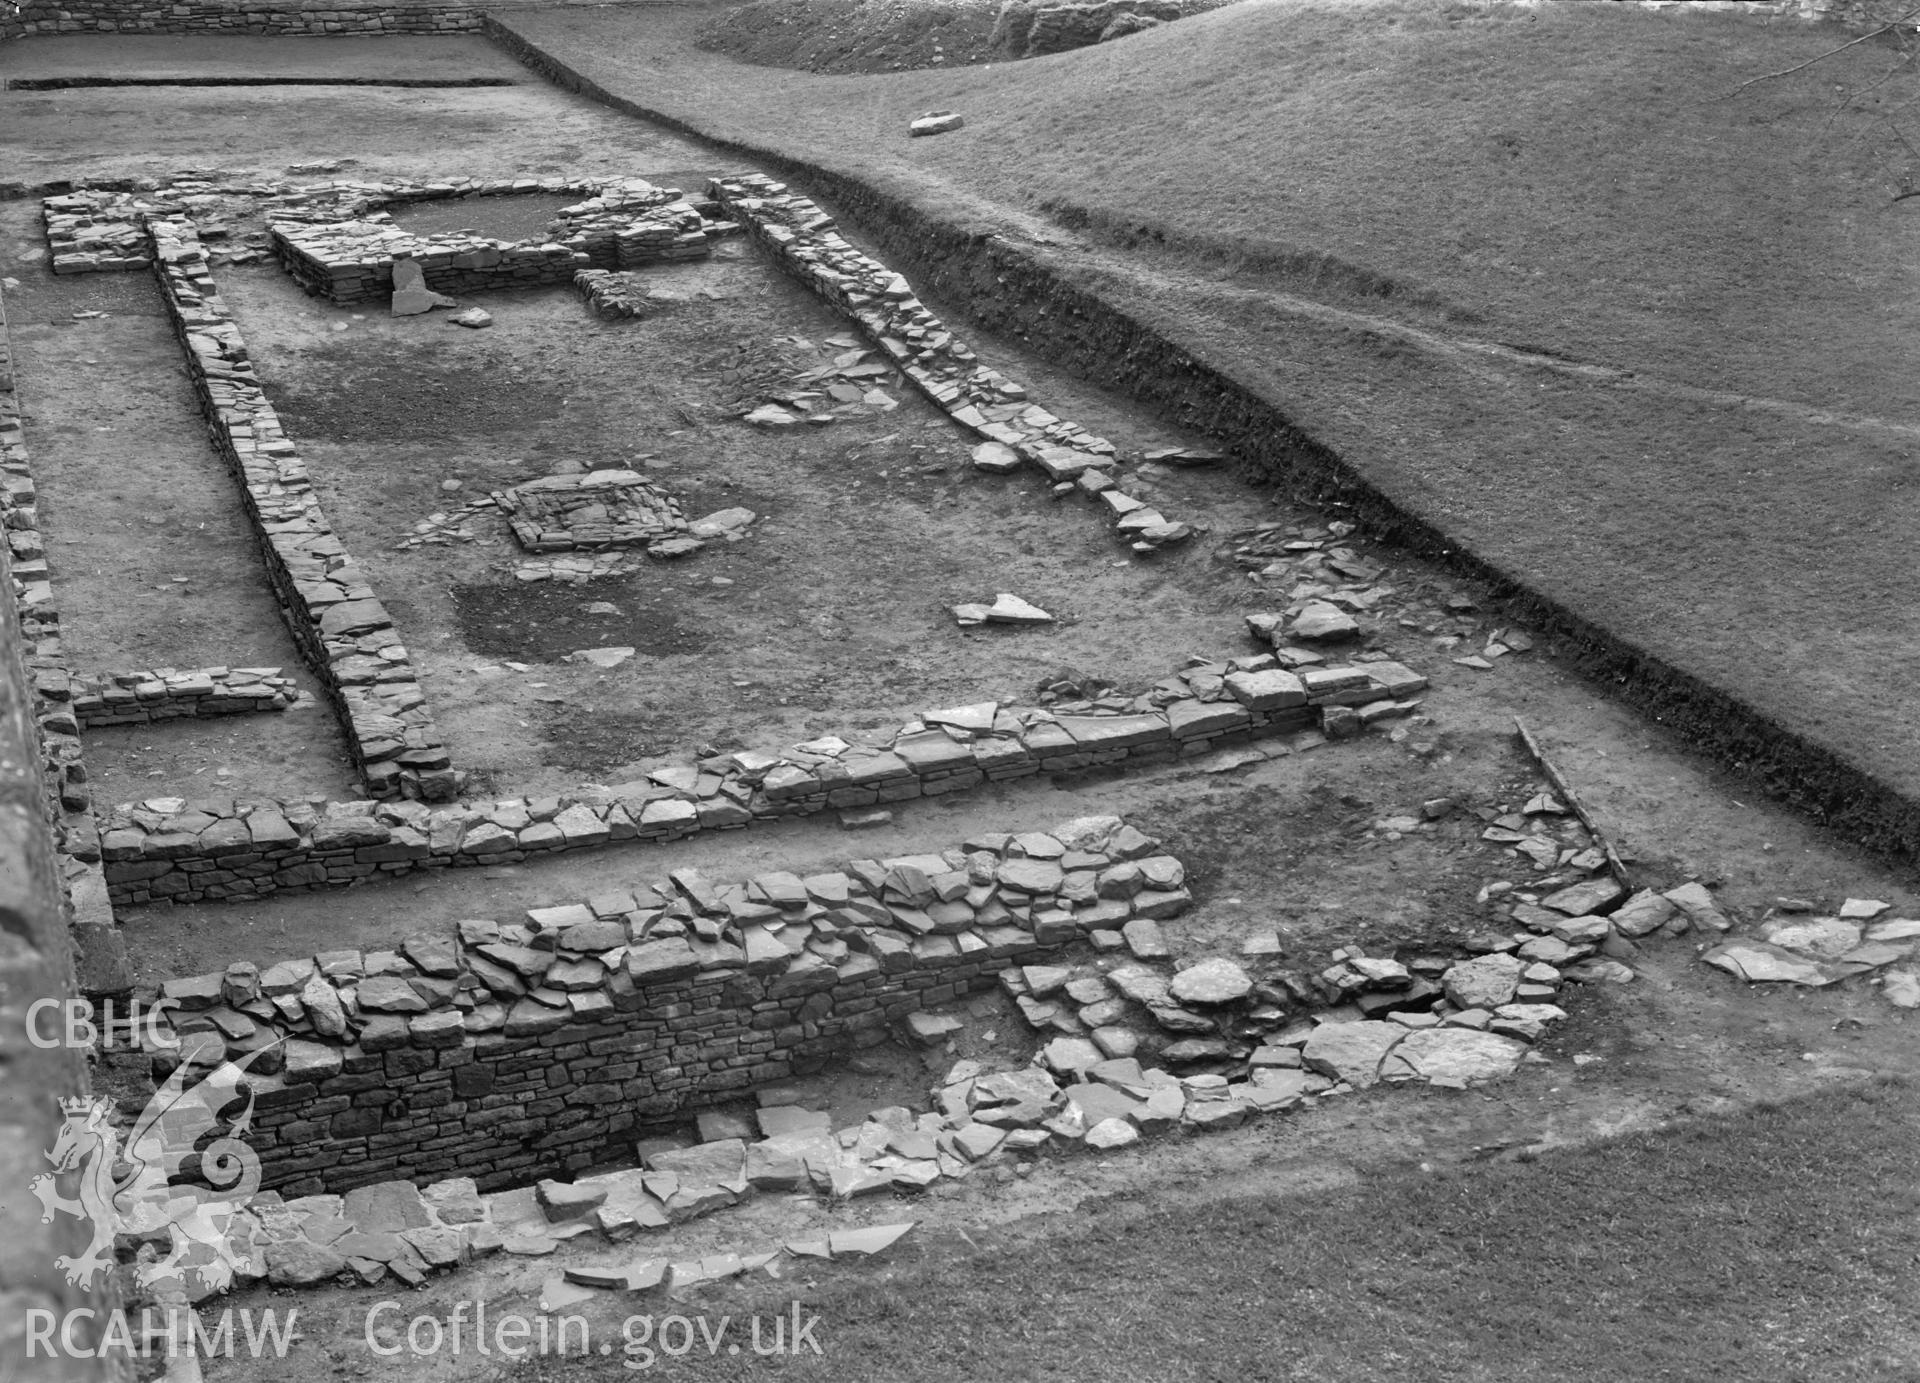 D.O.E photograph of Skenfrith Castle. 1965-66 excavations - posternstair and building foundations including oven and hearth.